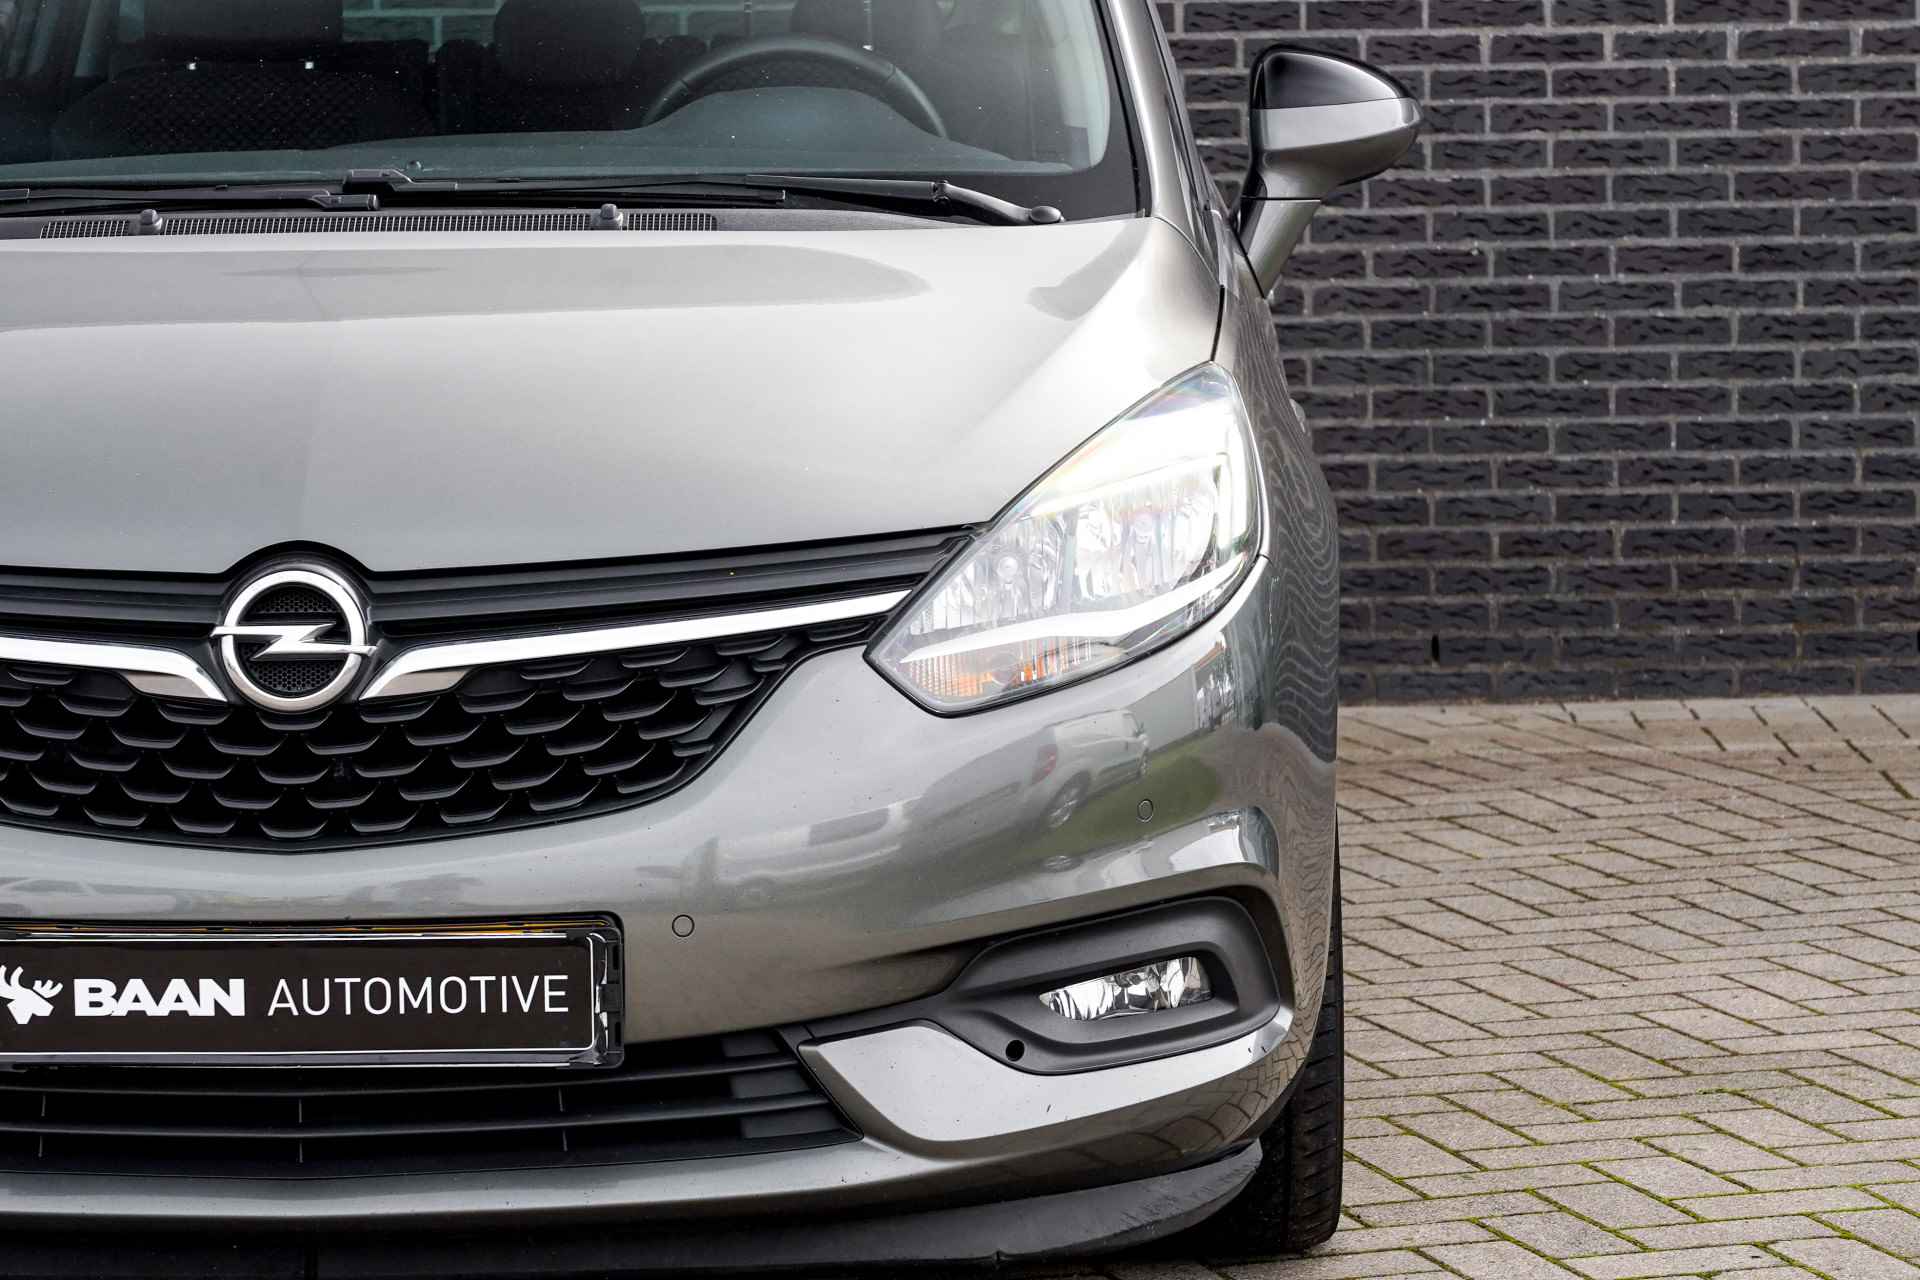 Opel Zafira 1.4 Turbo Business Executive 7 persoons | Navigatie | Airco | Cruise Control - 32/33